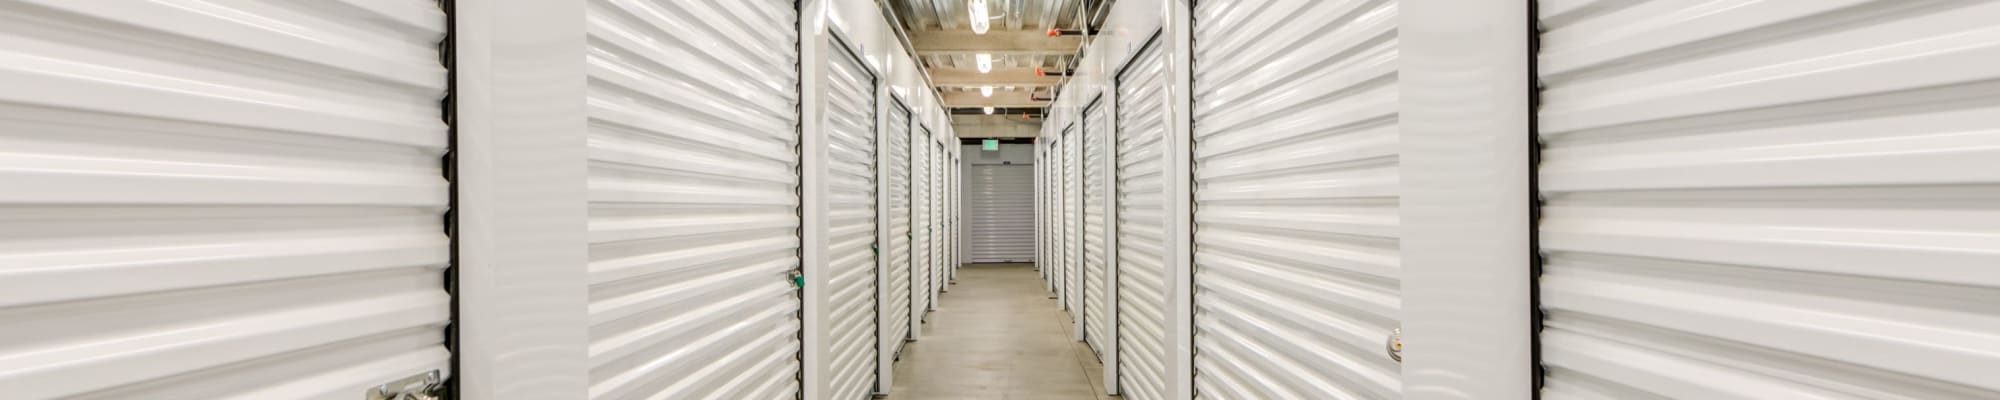 Contact us for your self storage needs in Menifee